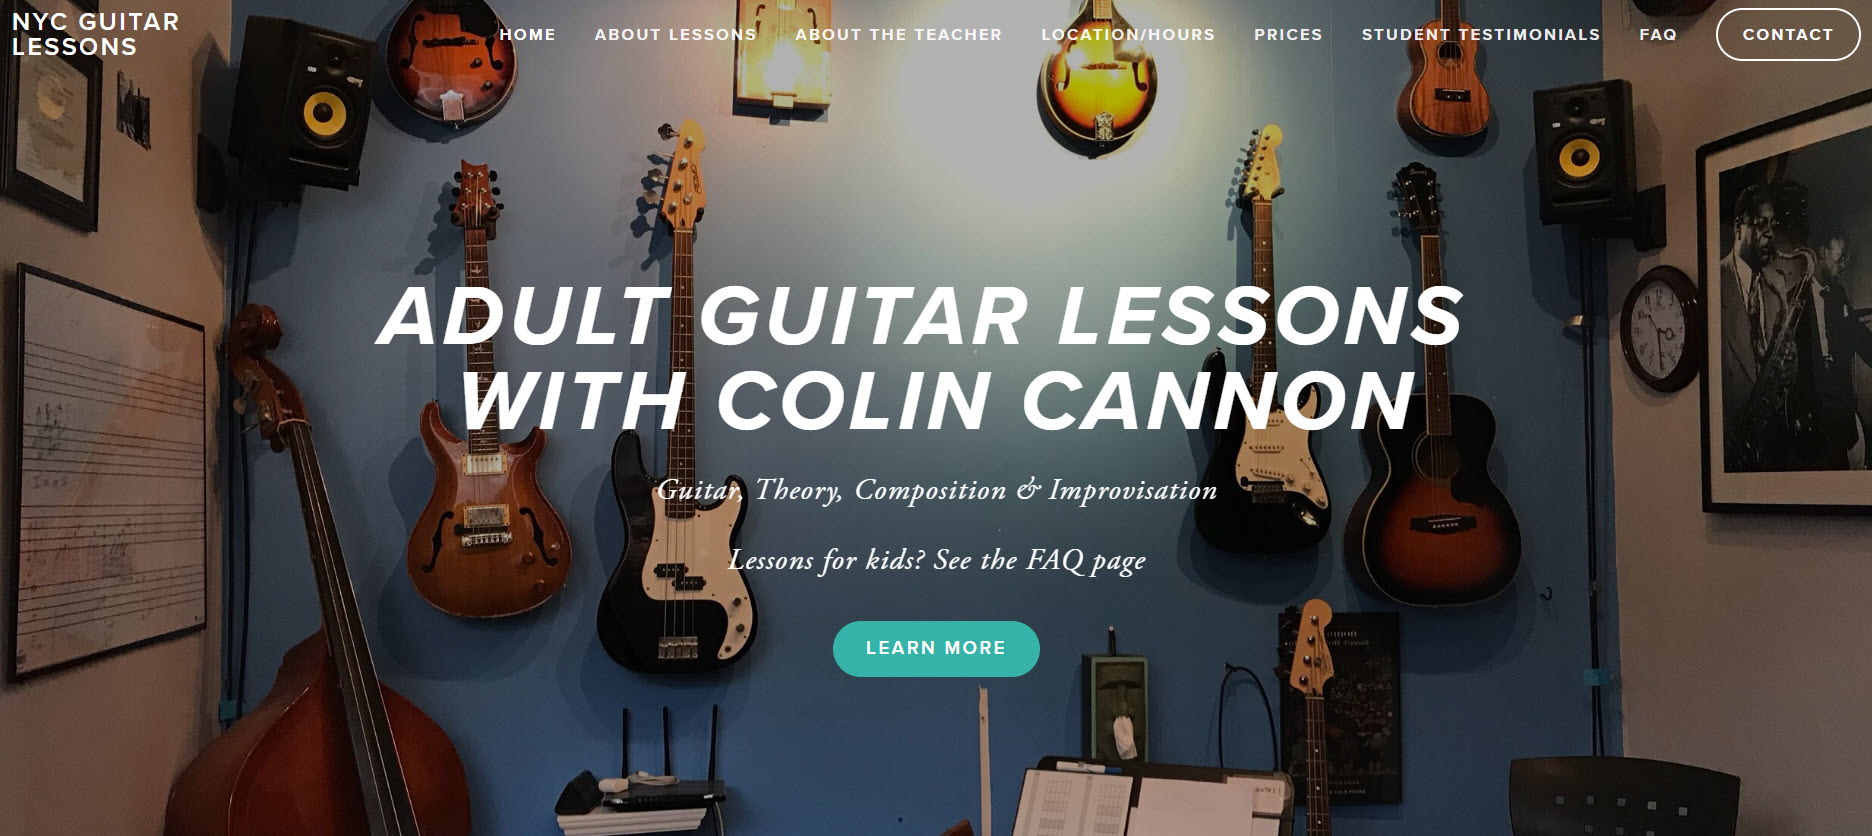 NYC Guitar Lessons